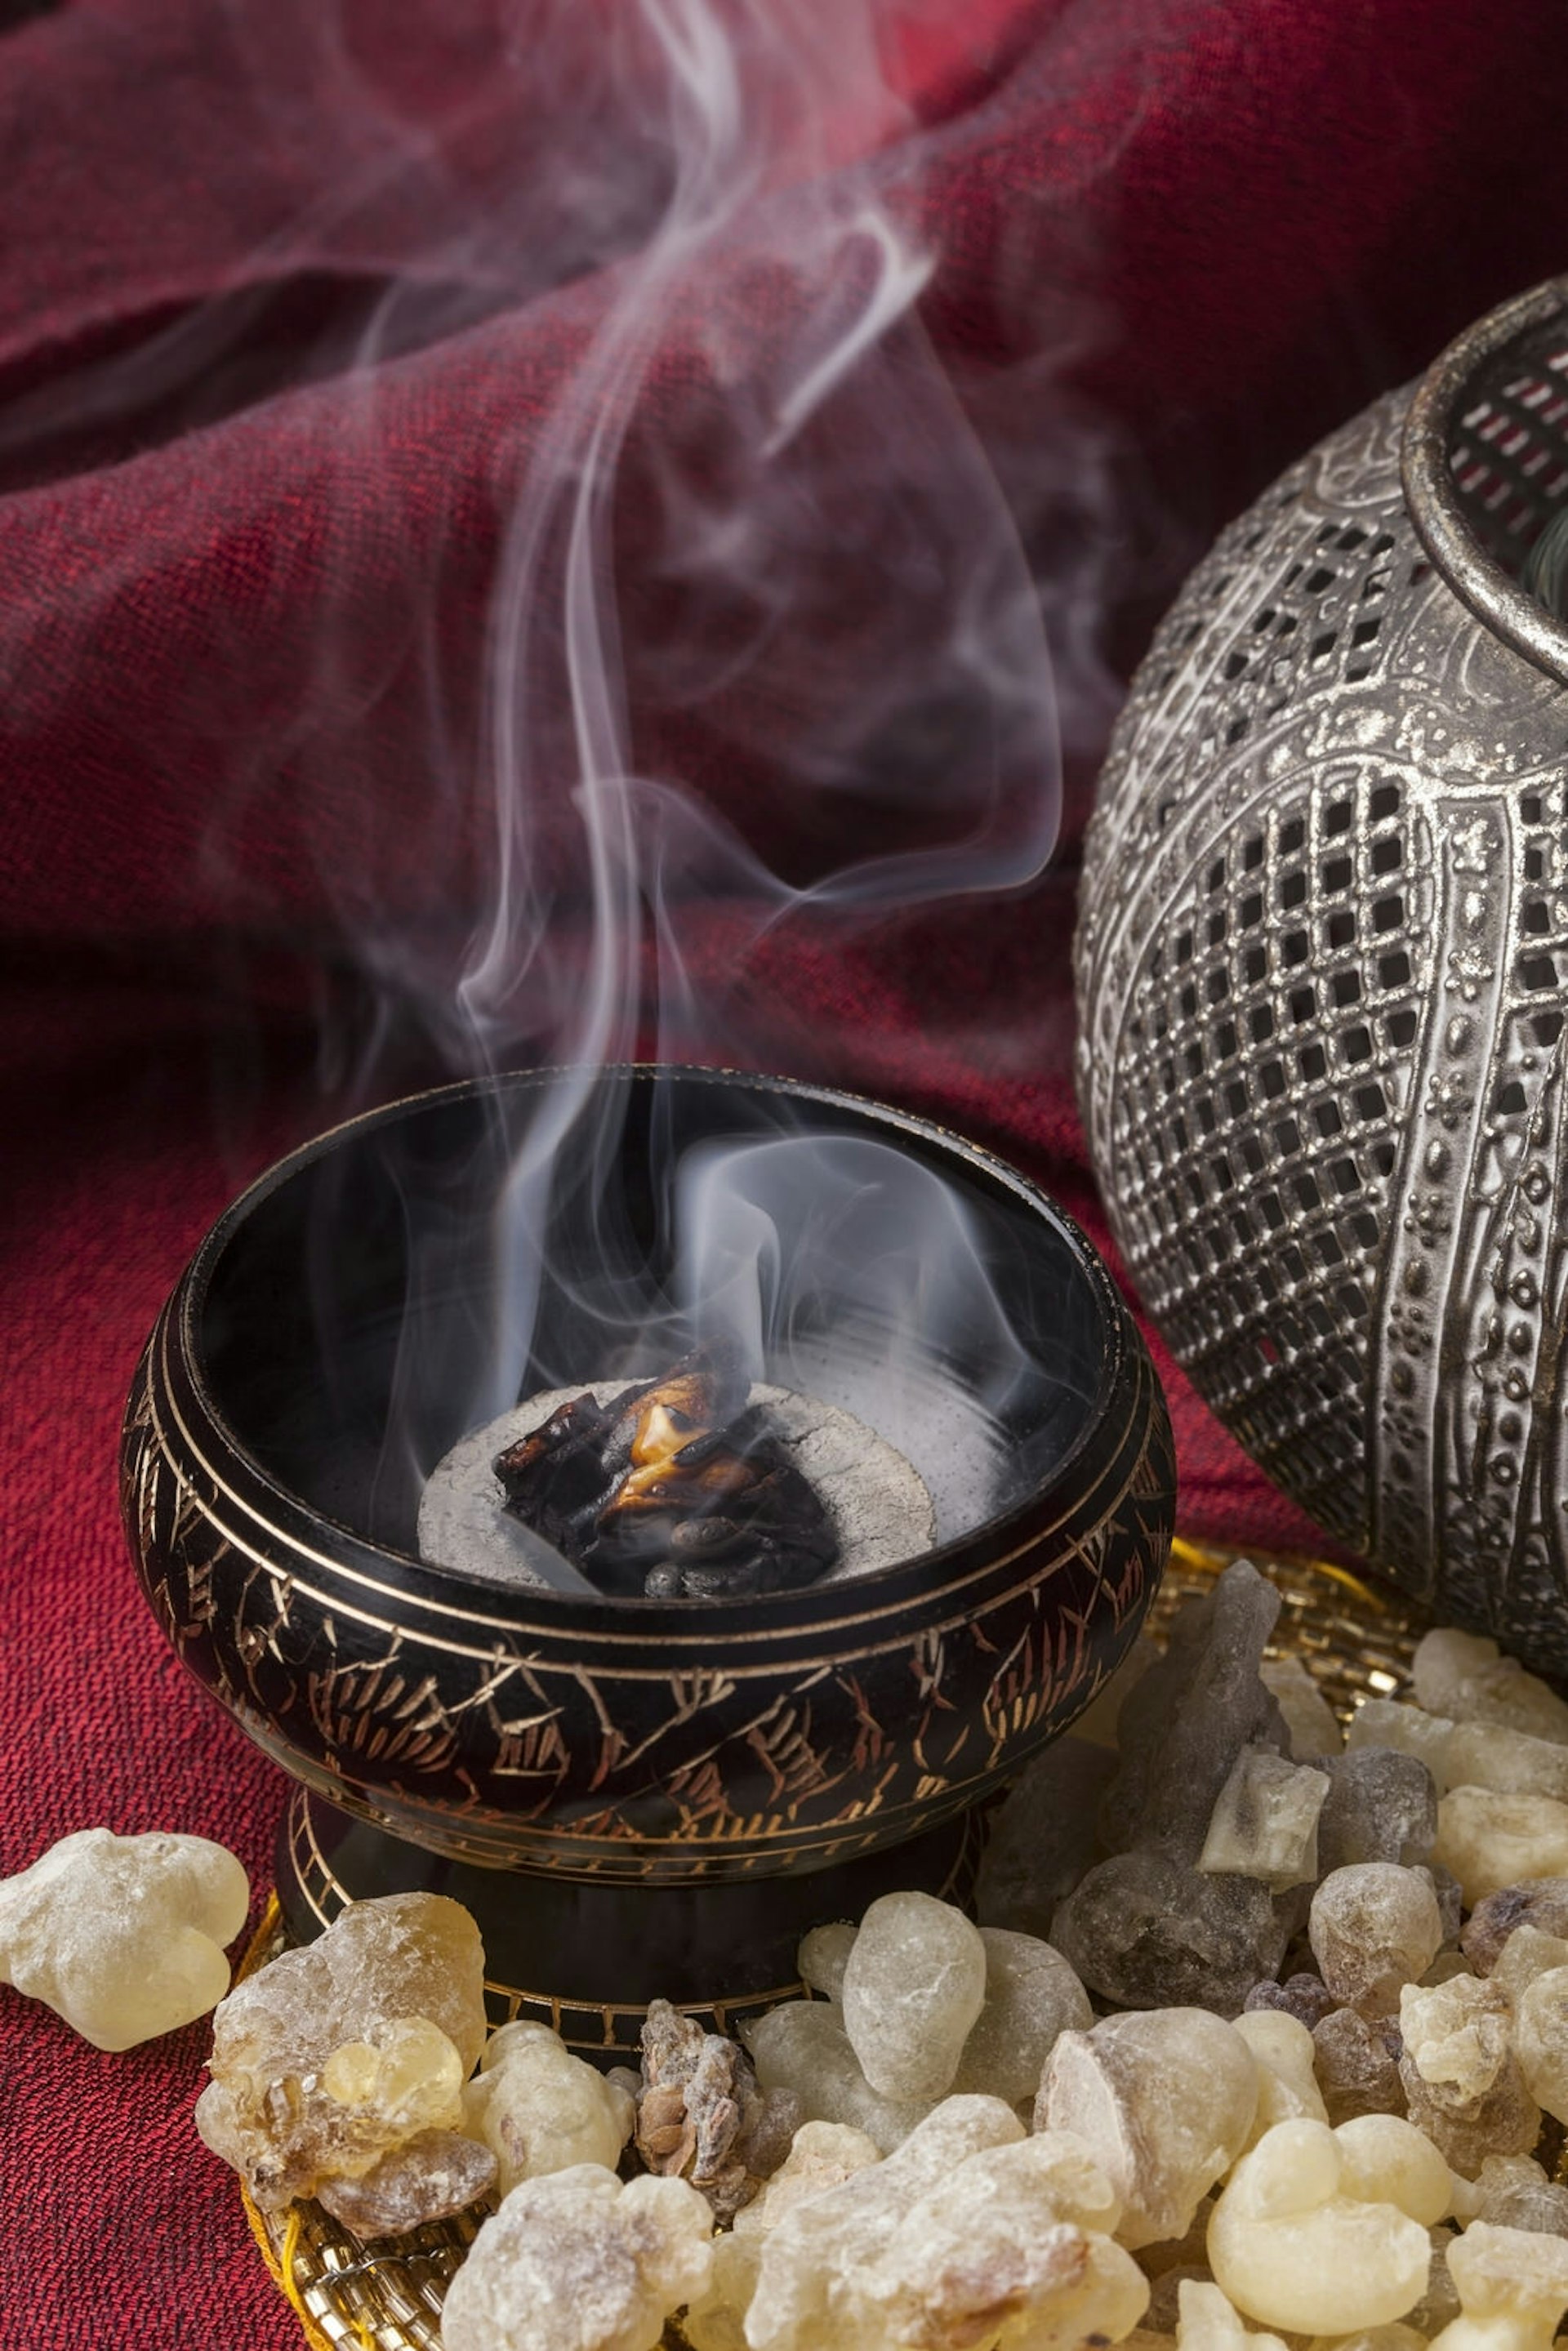 Frankincense burning on a hot coal. Frankincense is an aromatic resin, used for religious rites, incense and perfumes © JurateBuiviene / Shutterstock